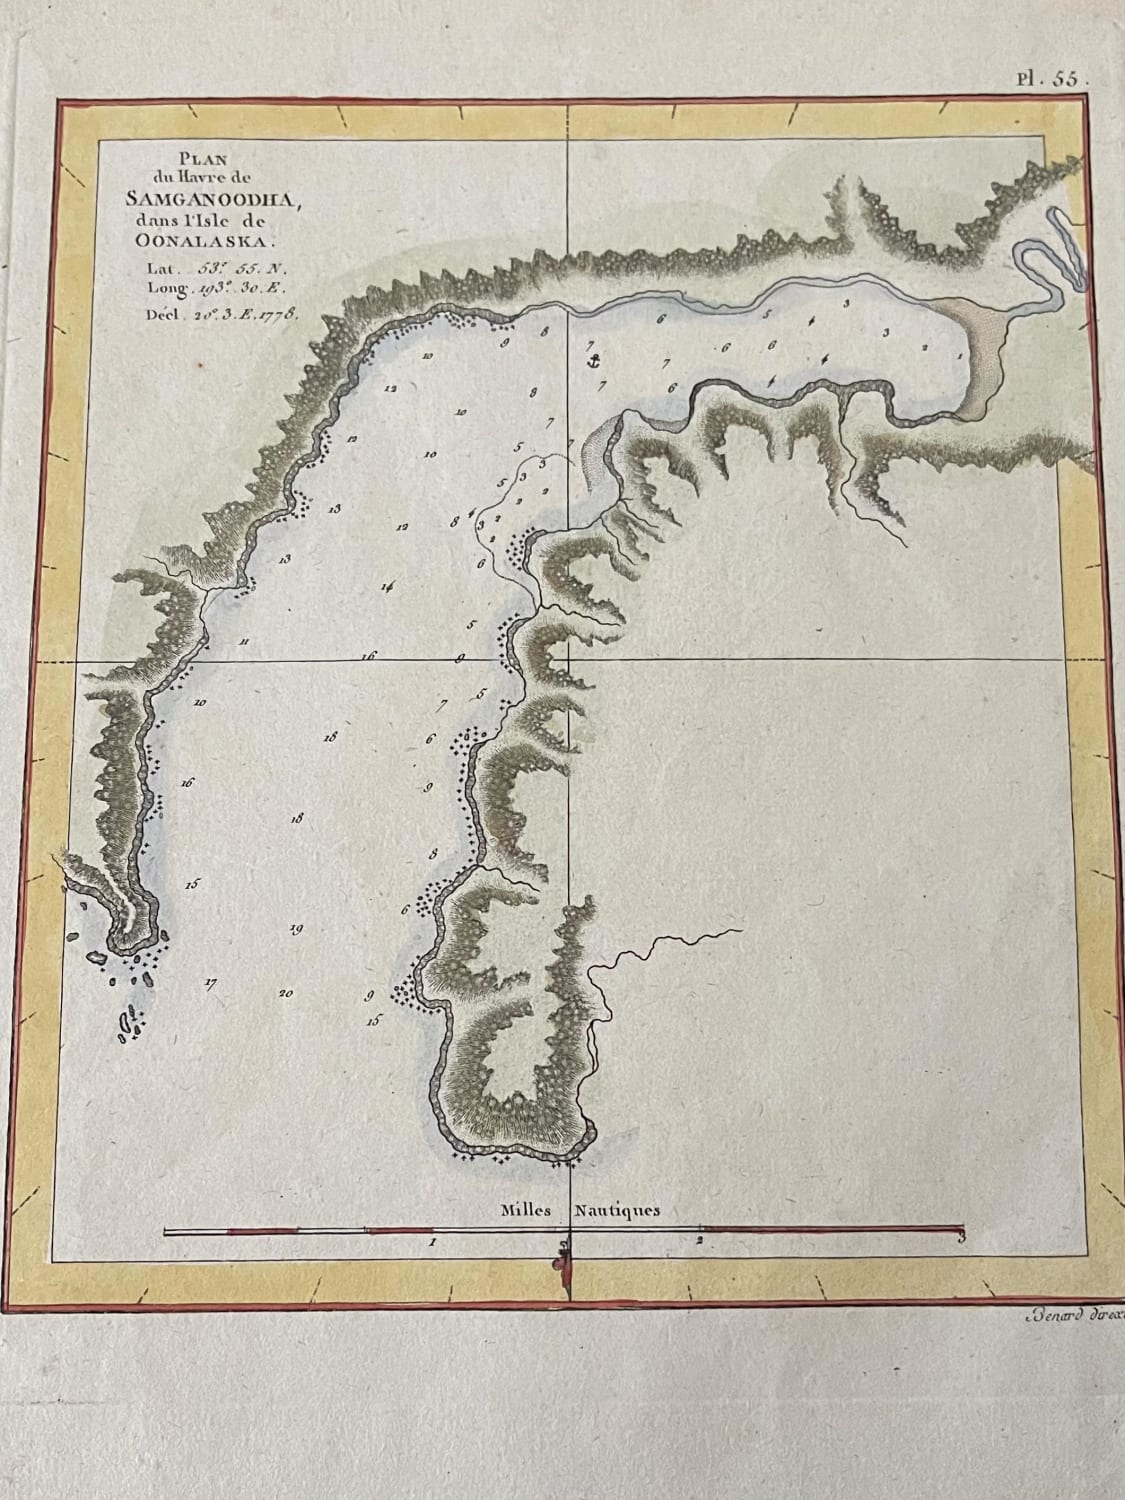 1778 hand drawn map of Samganoodha Harbour on Unalaska Island. I cannot find the actual harbour anywhere on Google maps, or anything that looks similar. Awesome bits of history to own though.